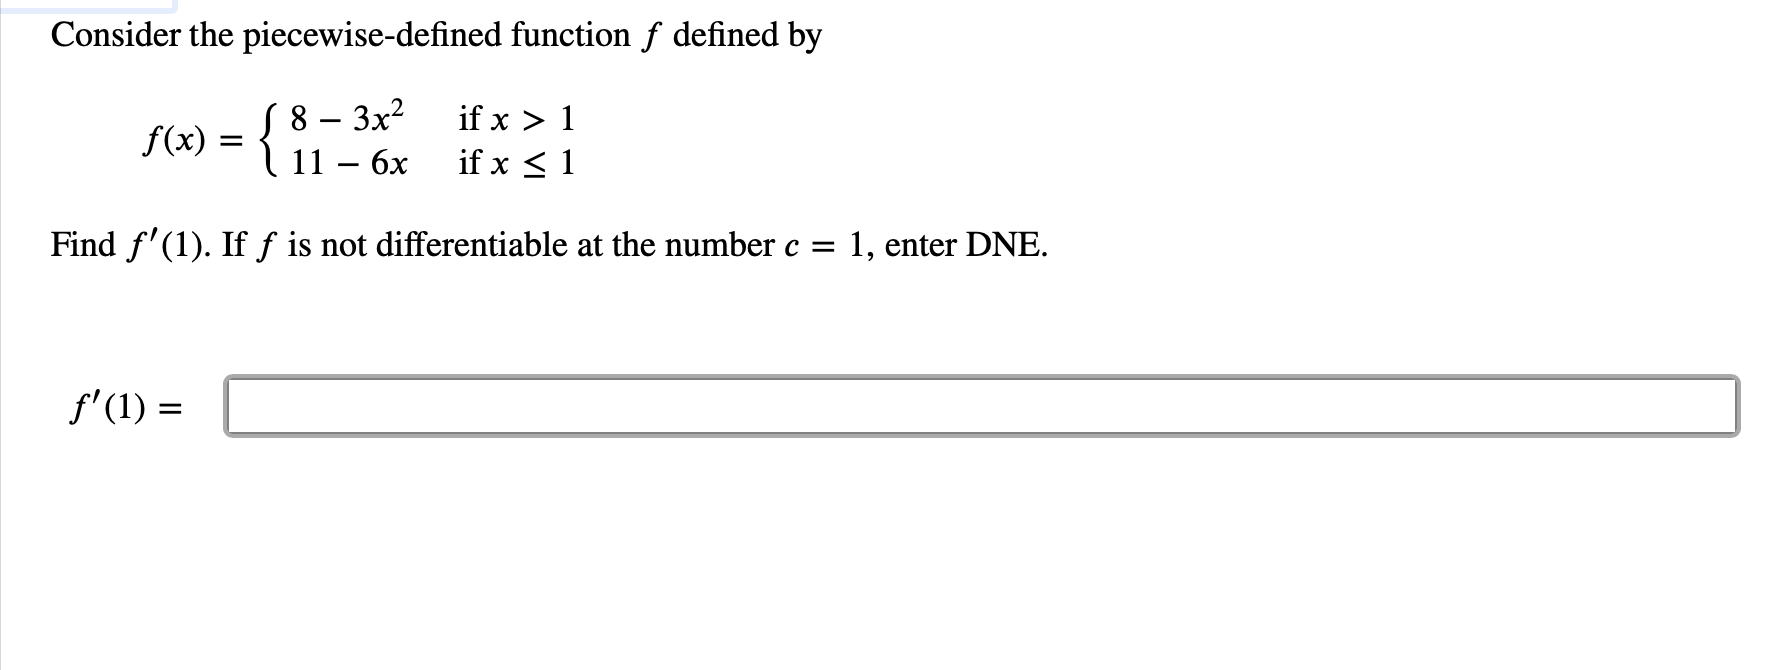 Consider the piecewise-defined function f defined by
8 -3x2
11 6x
{
if x 1
if x 1
f(x)
Find f'(1). Iff is not differentiable at the number c =
1, enter DNE
f'(1)
